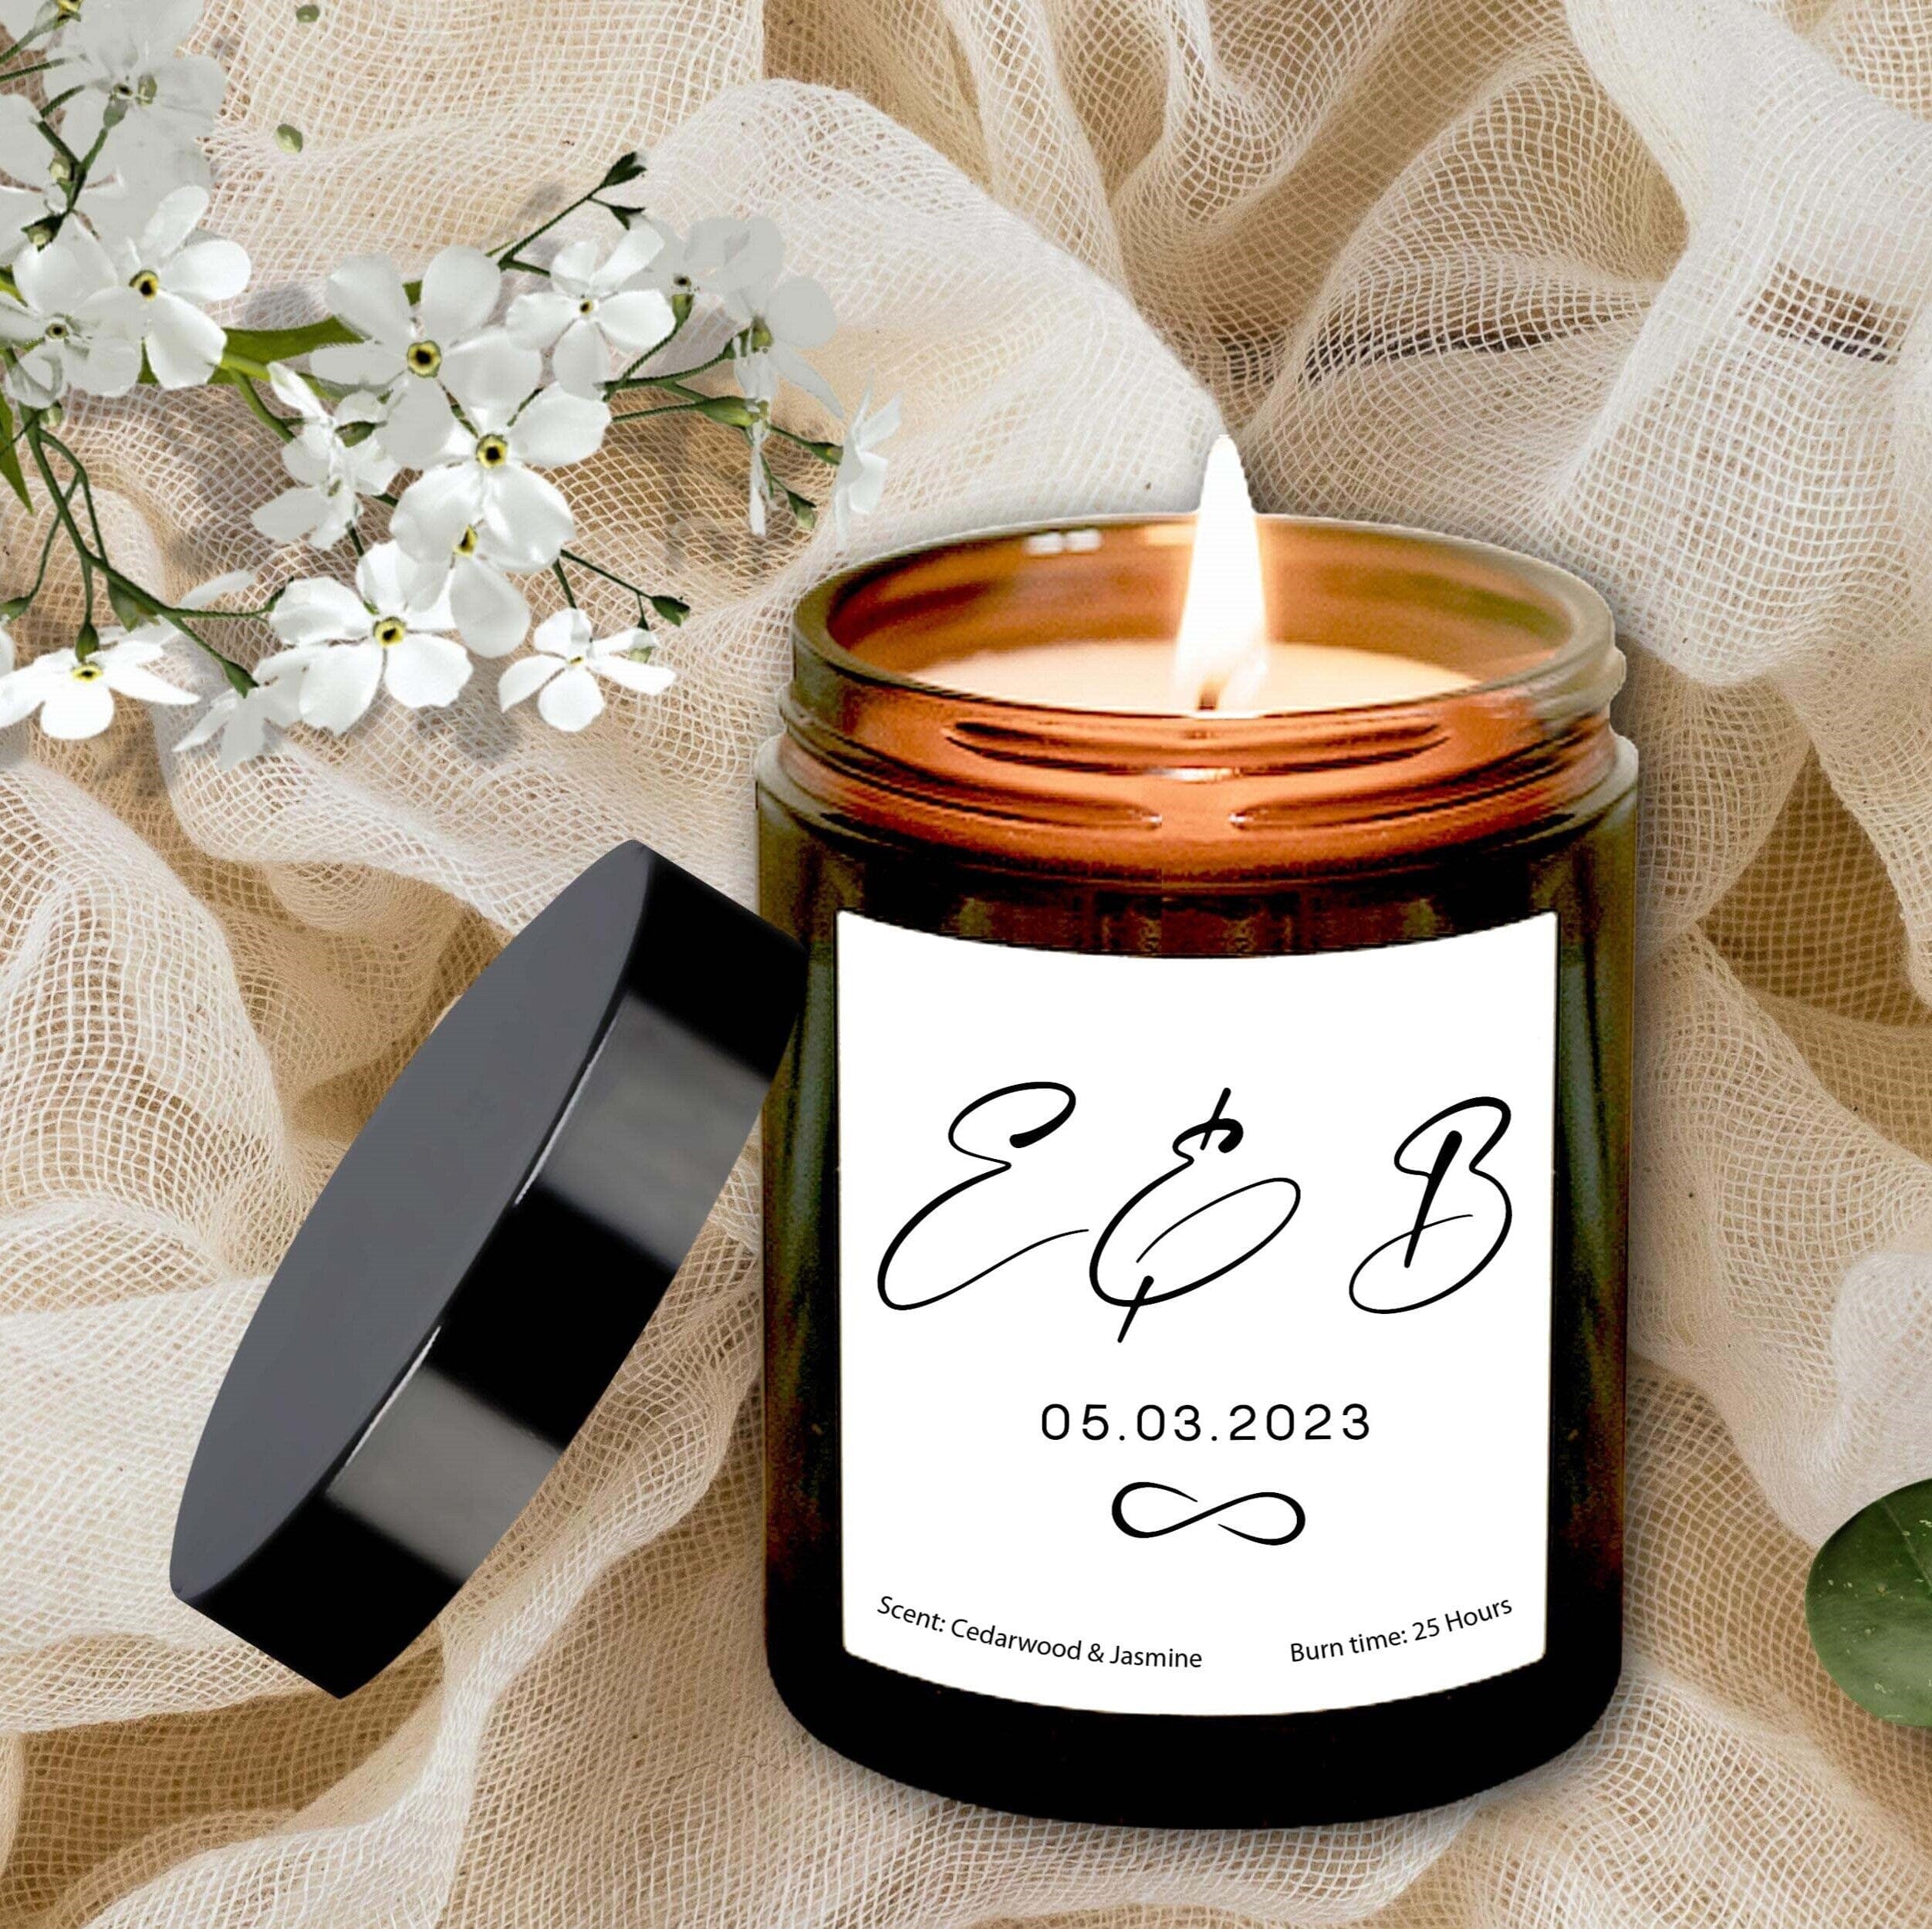 Candle for couple with initials and date, Wedding or Engagement Gift Soy Wax Scented Candle